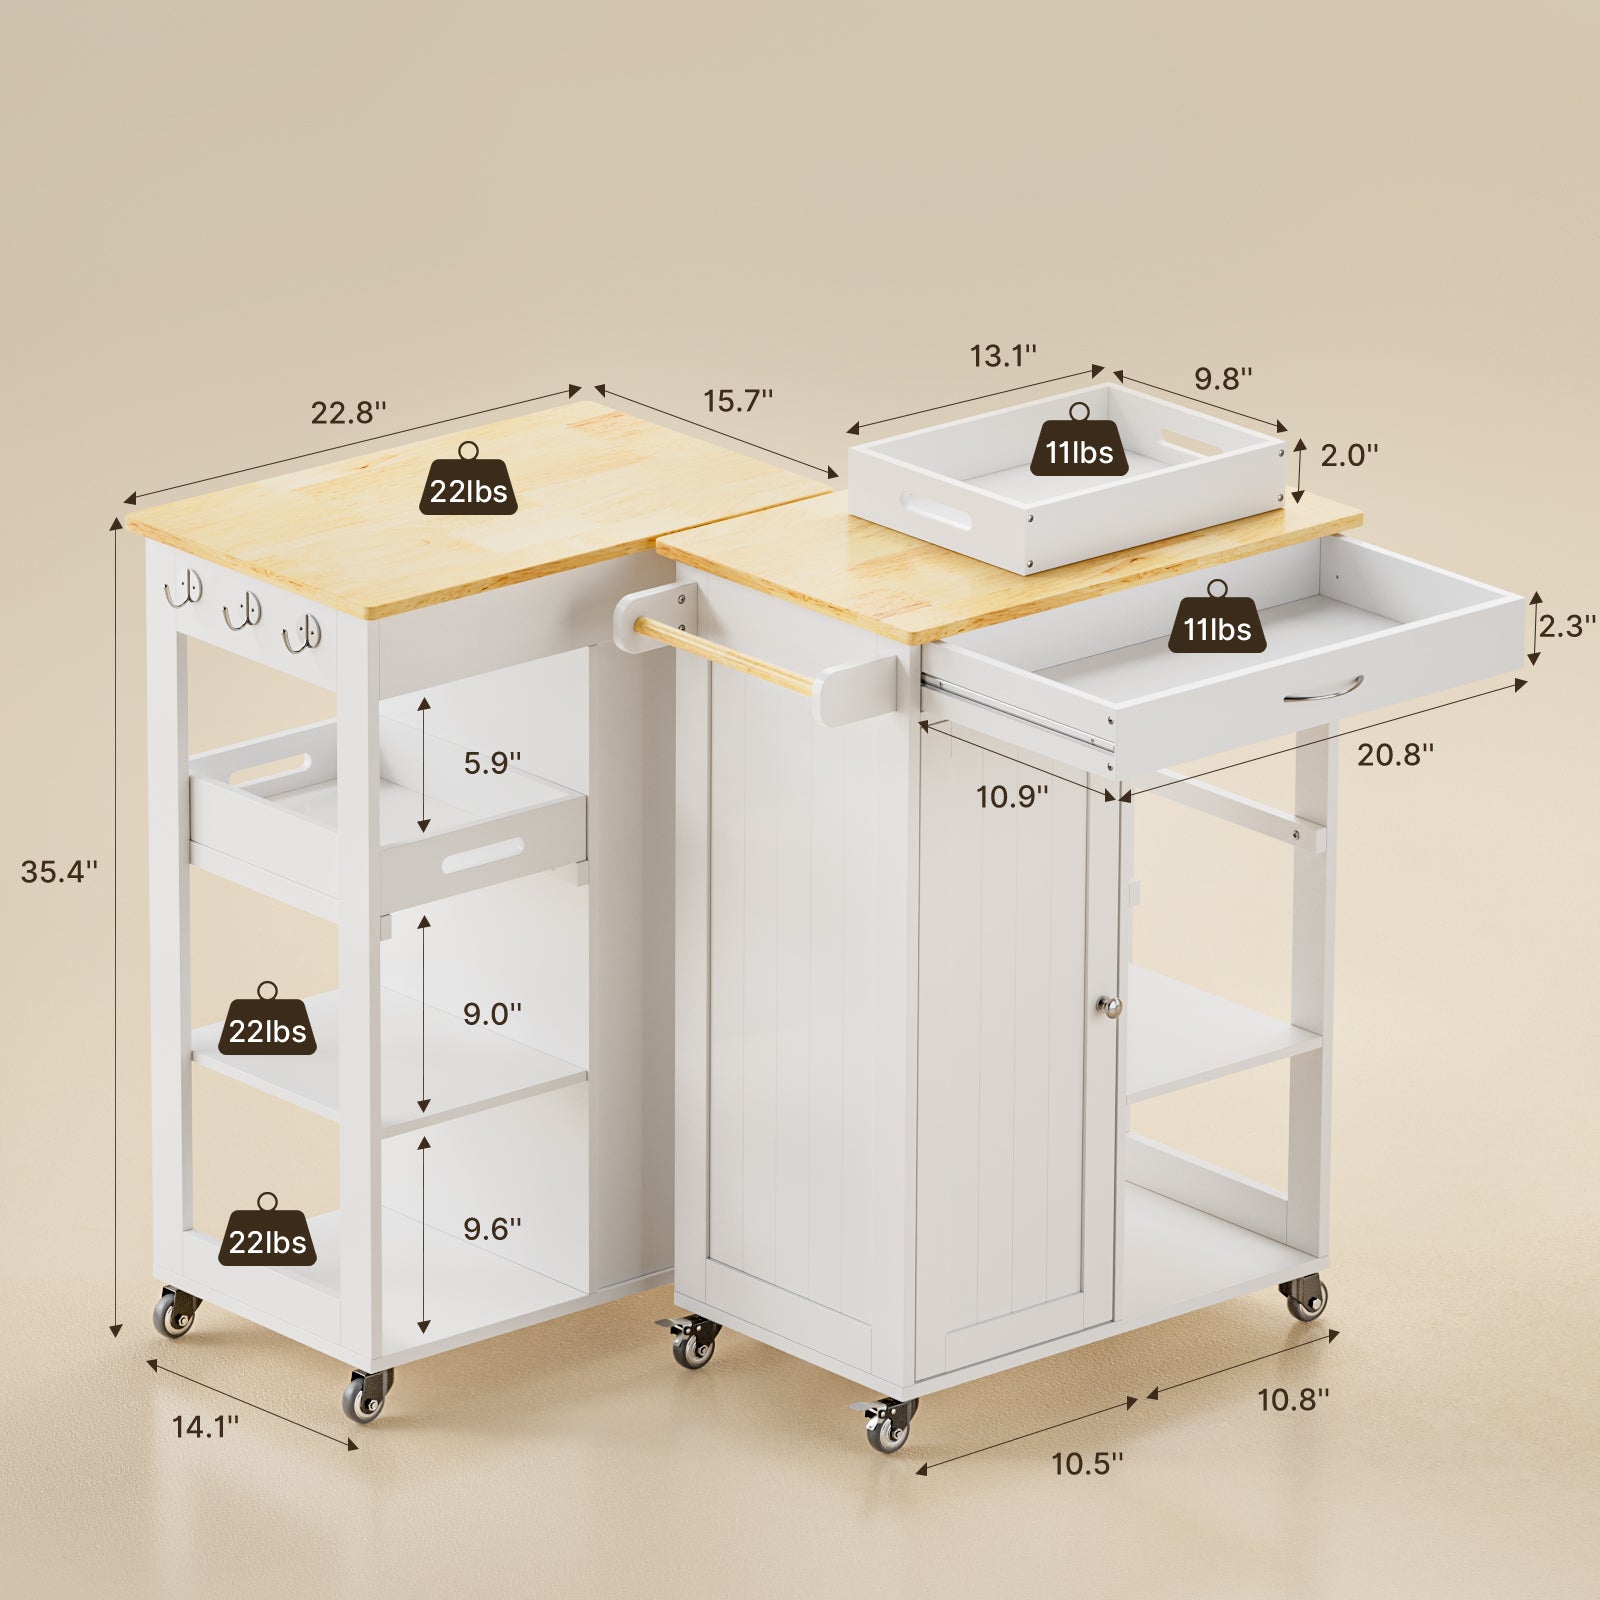 Gizoon KC50 27.6''W Kitchen Island Cart with Removable Tray and Drawer